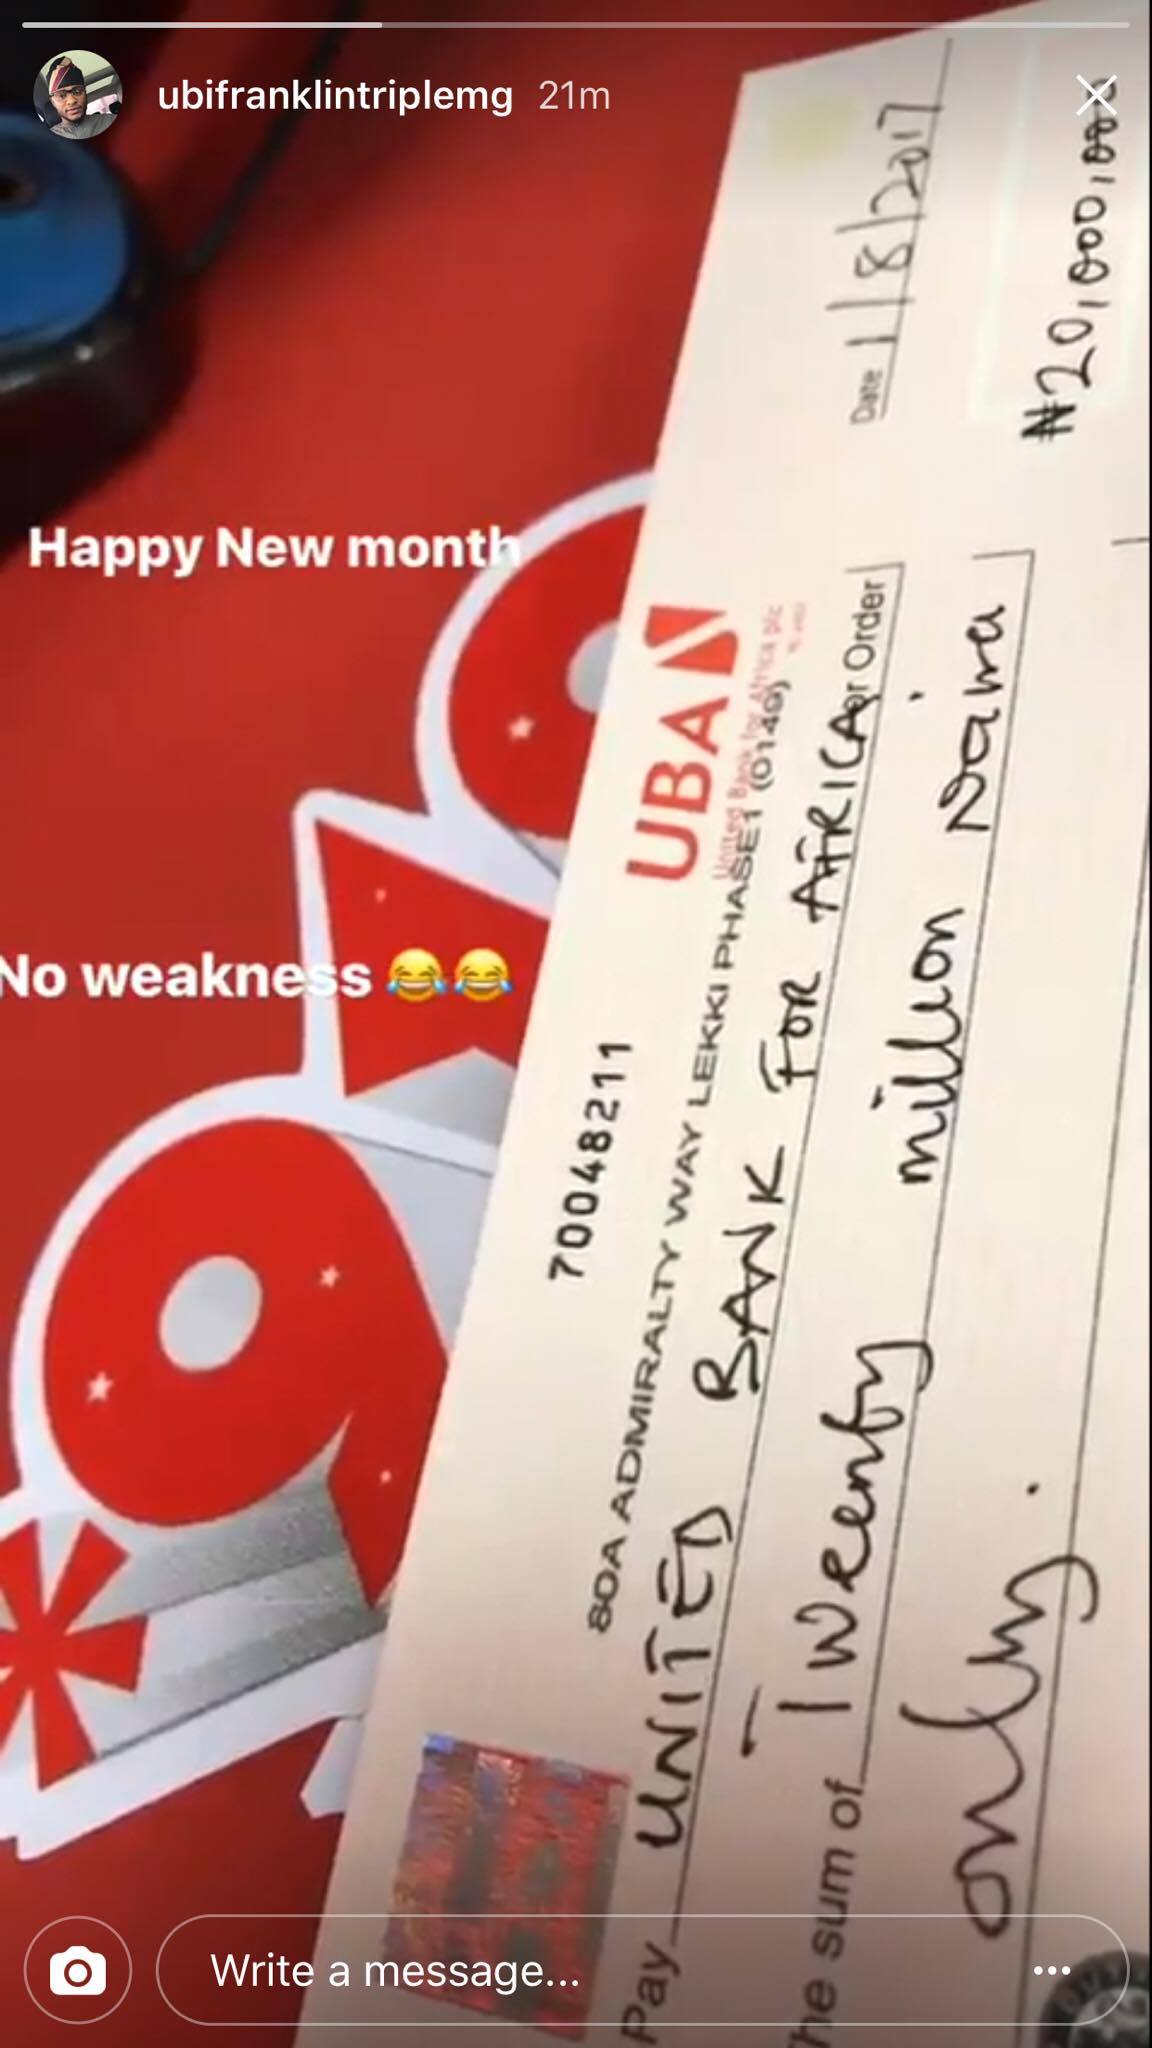 Ubi Franklin shares N20m cheque he received today